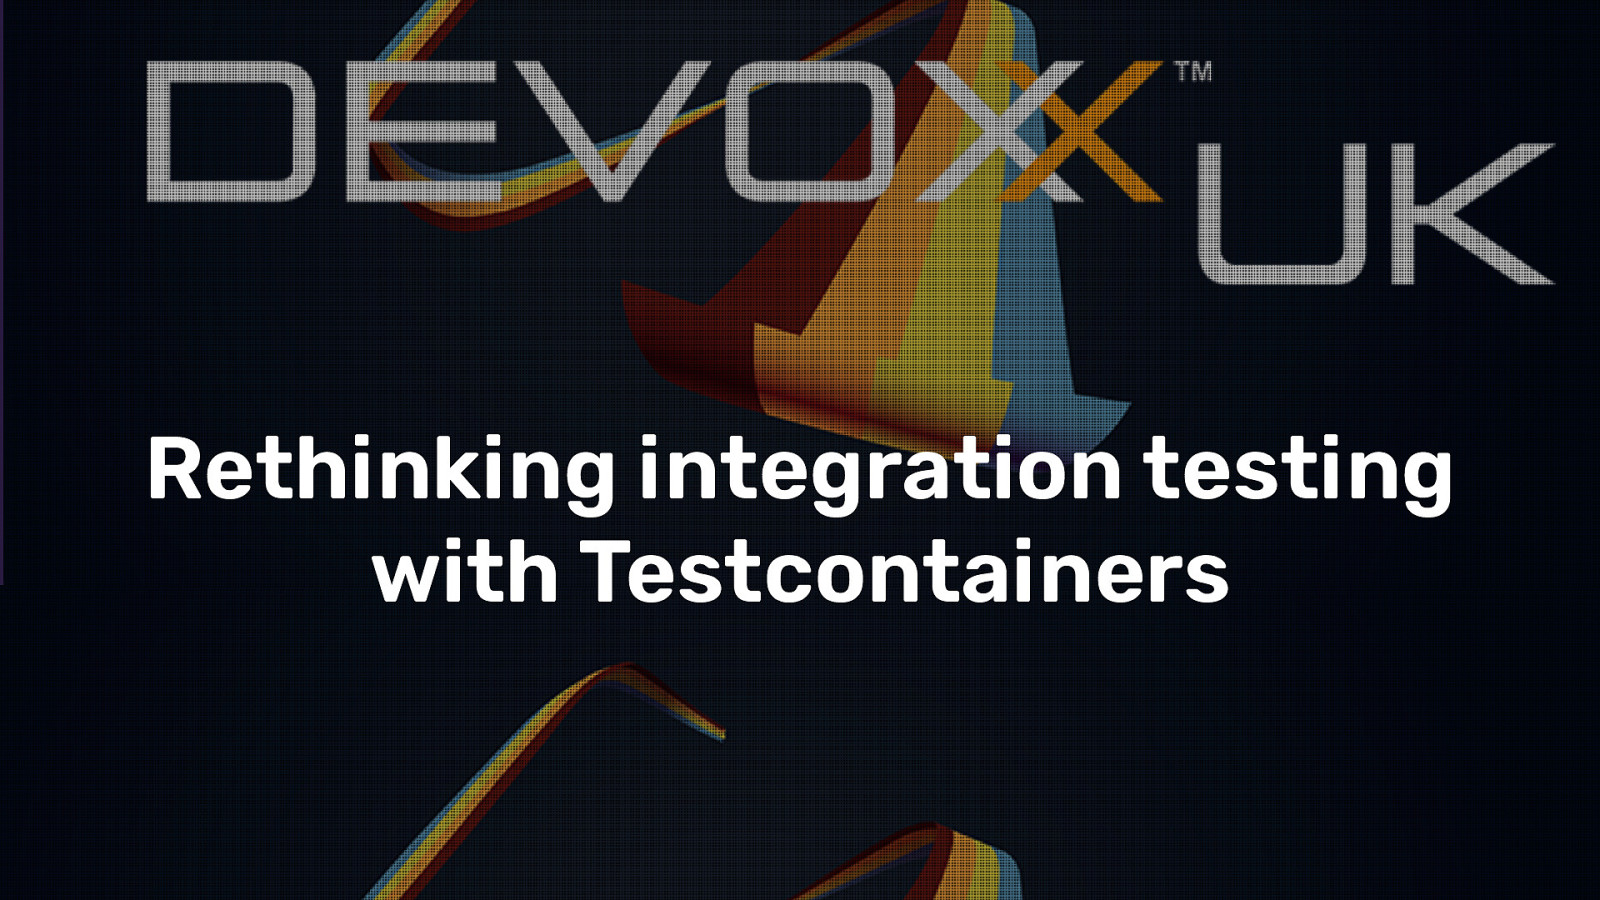 Rethinking integration testing with Testcontainers by Oleg Šelajev